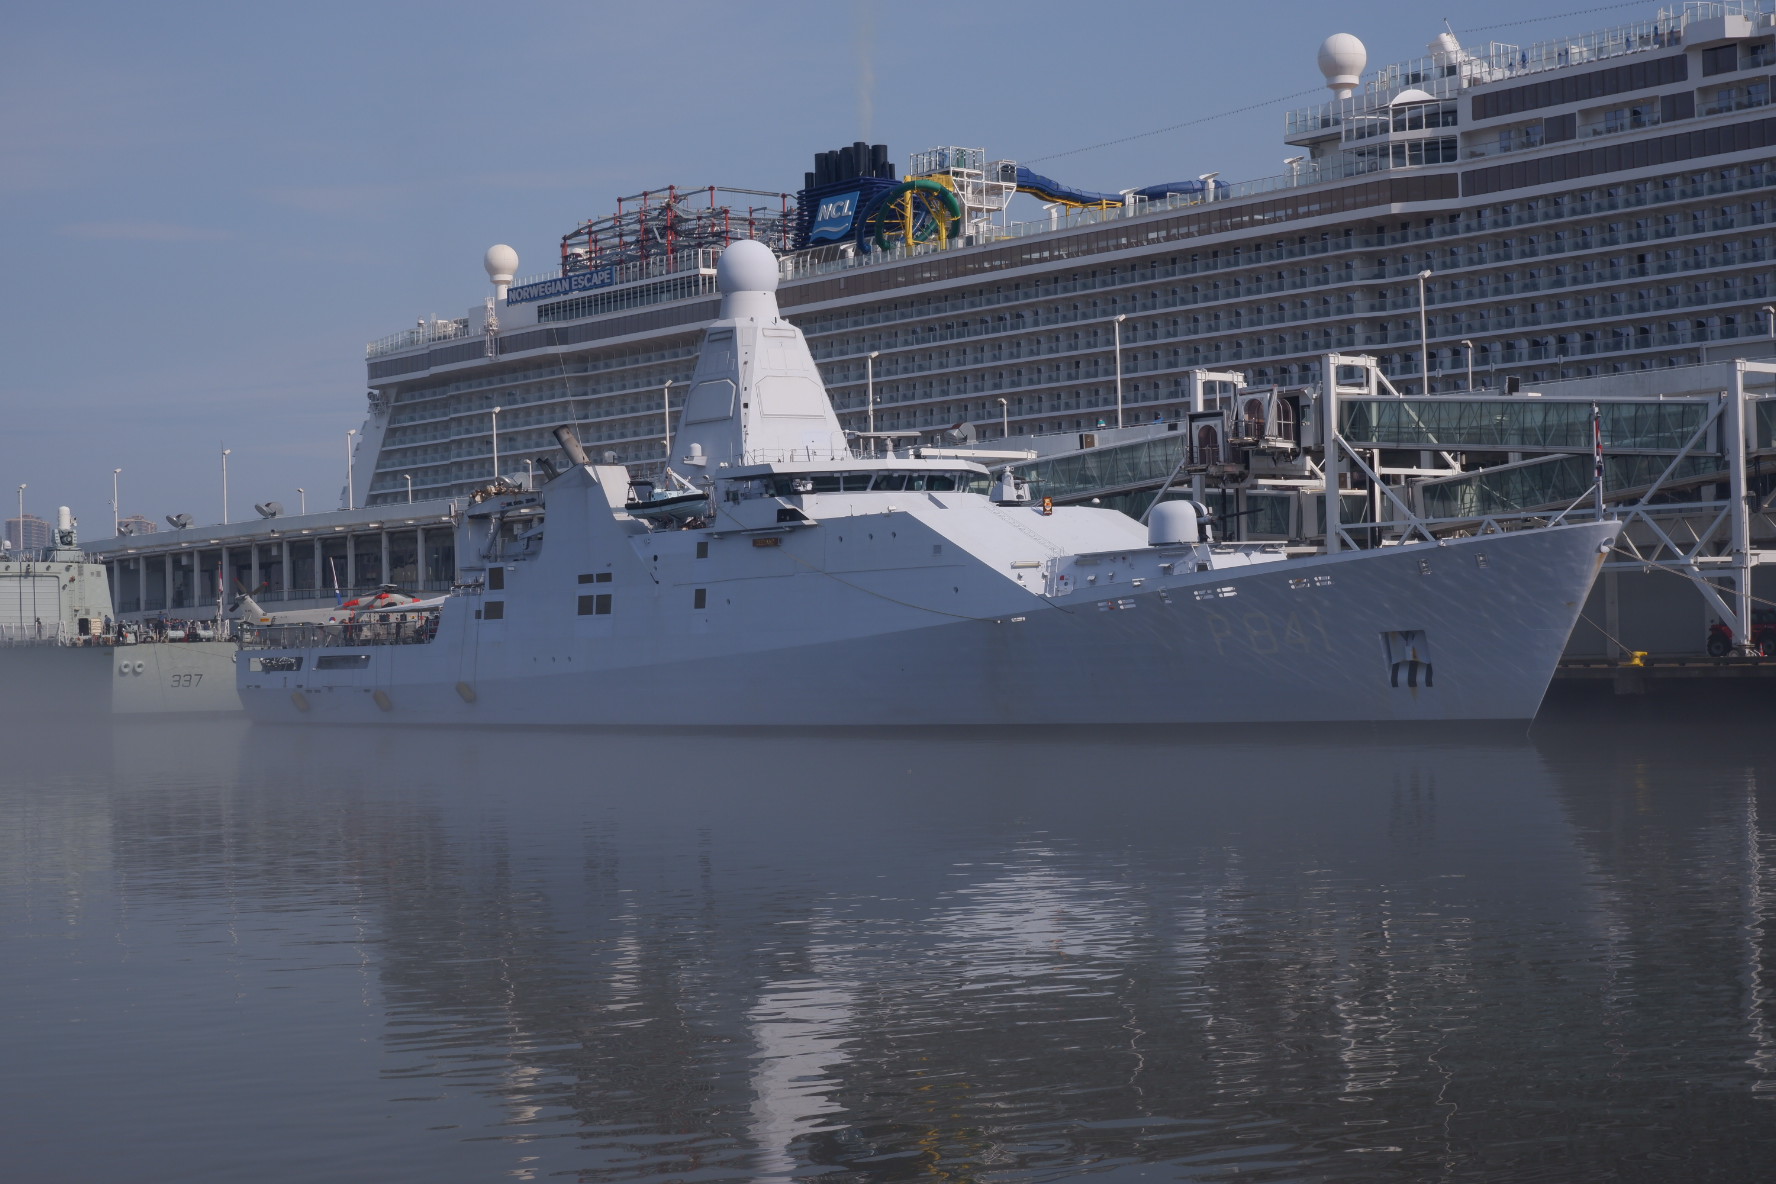 A white off-shore patrol vessel of the Royal Netherlands Navy moored at a pier with a cruise ship in the background